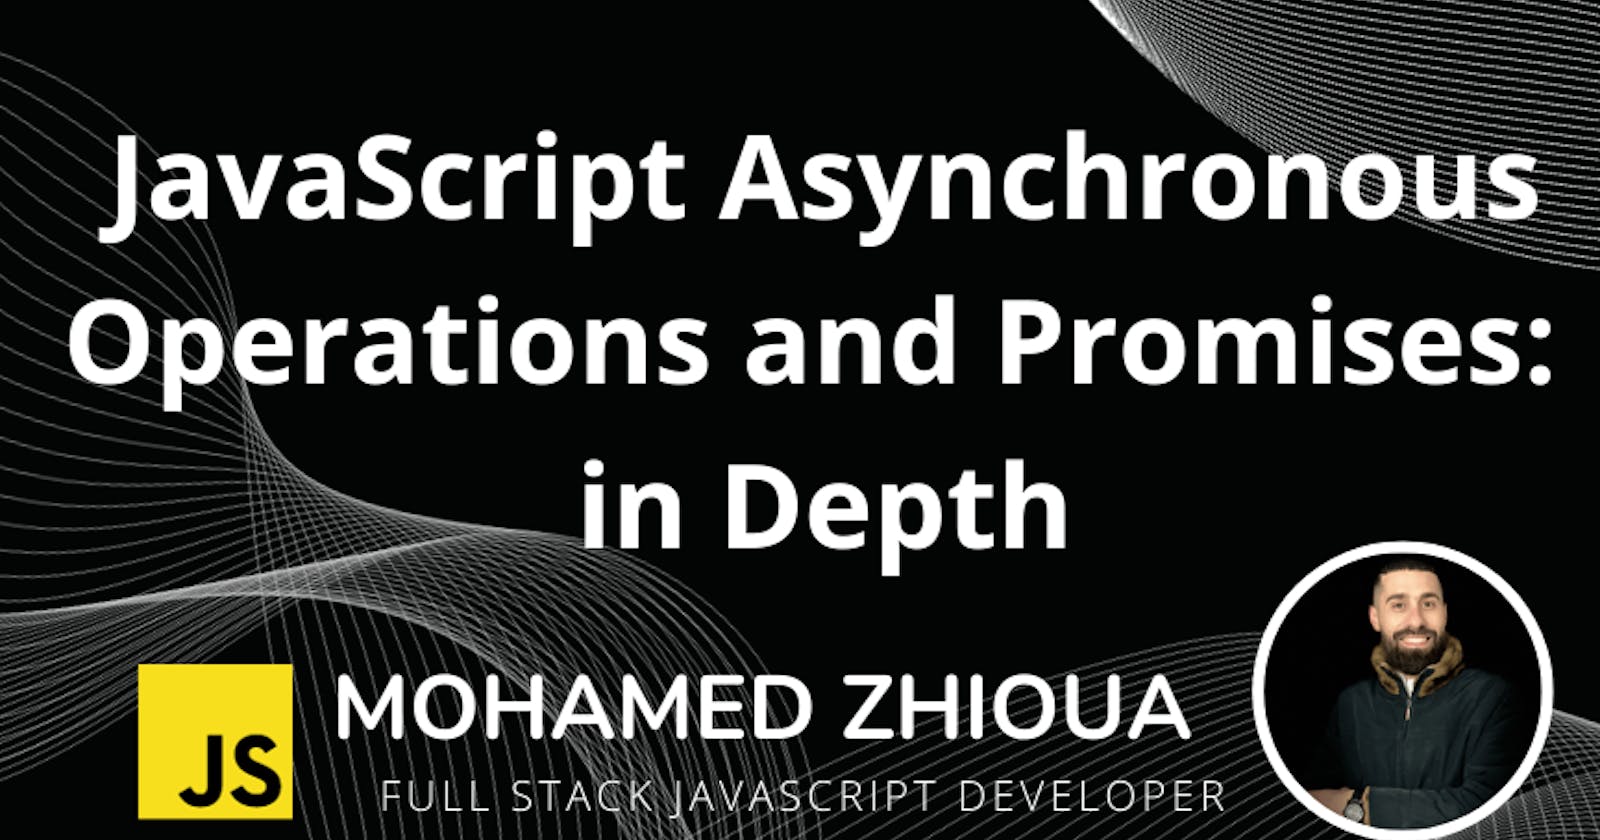 JavaScript Asynchronous Operations and Promises: in Depth